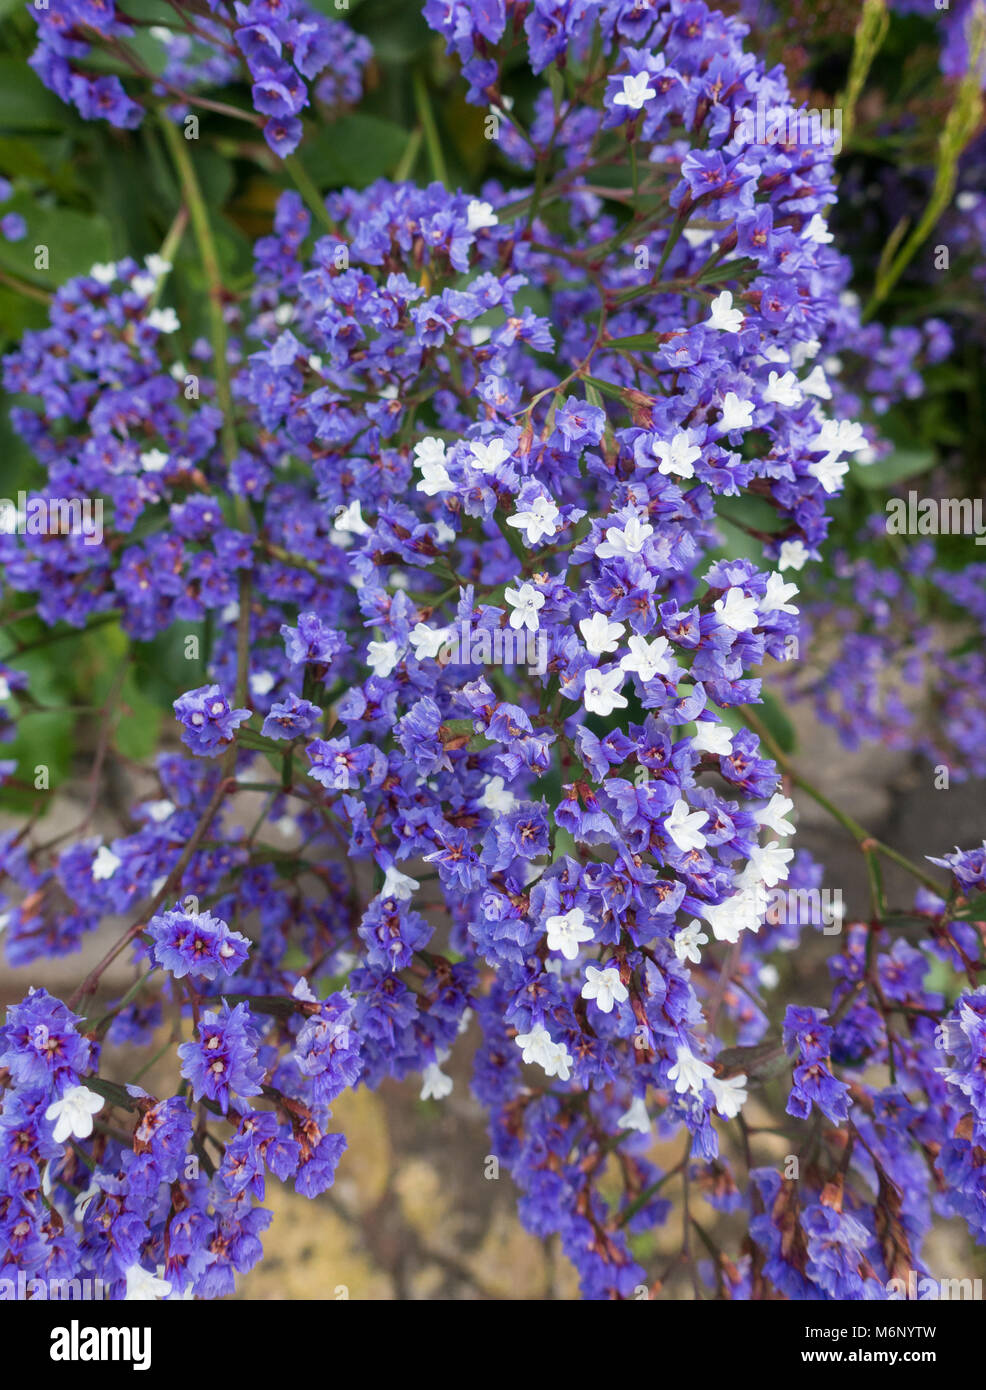 Limonium Sventenii is a critically endangered plant only found on Gran Canaria in the Canary Islands. Spain Stock Photo